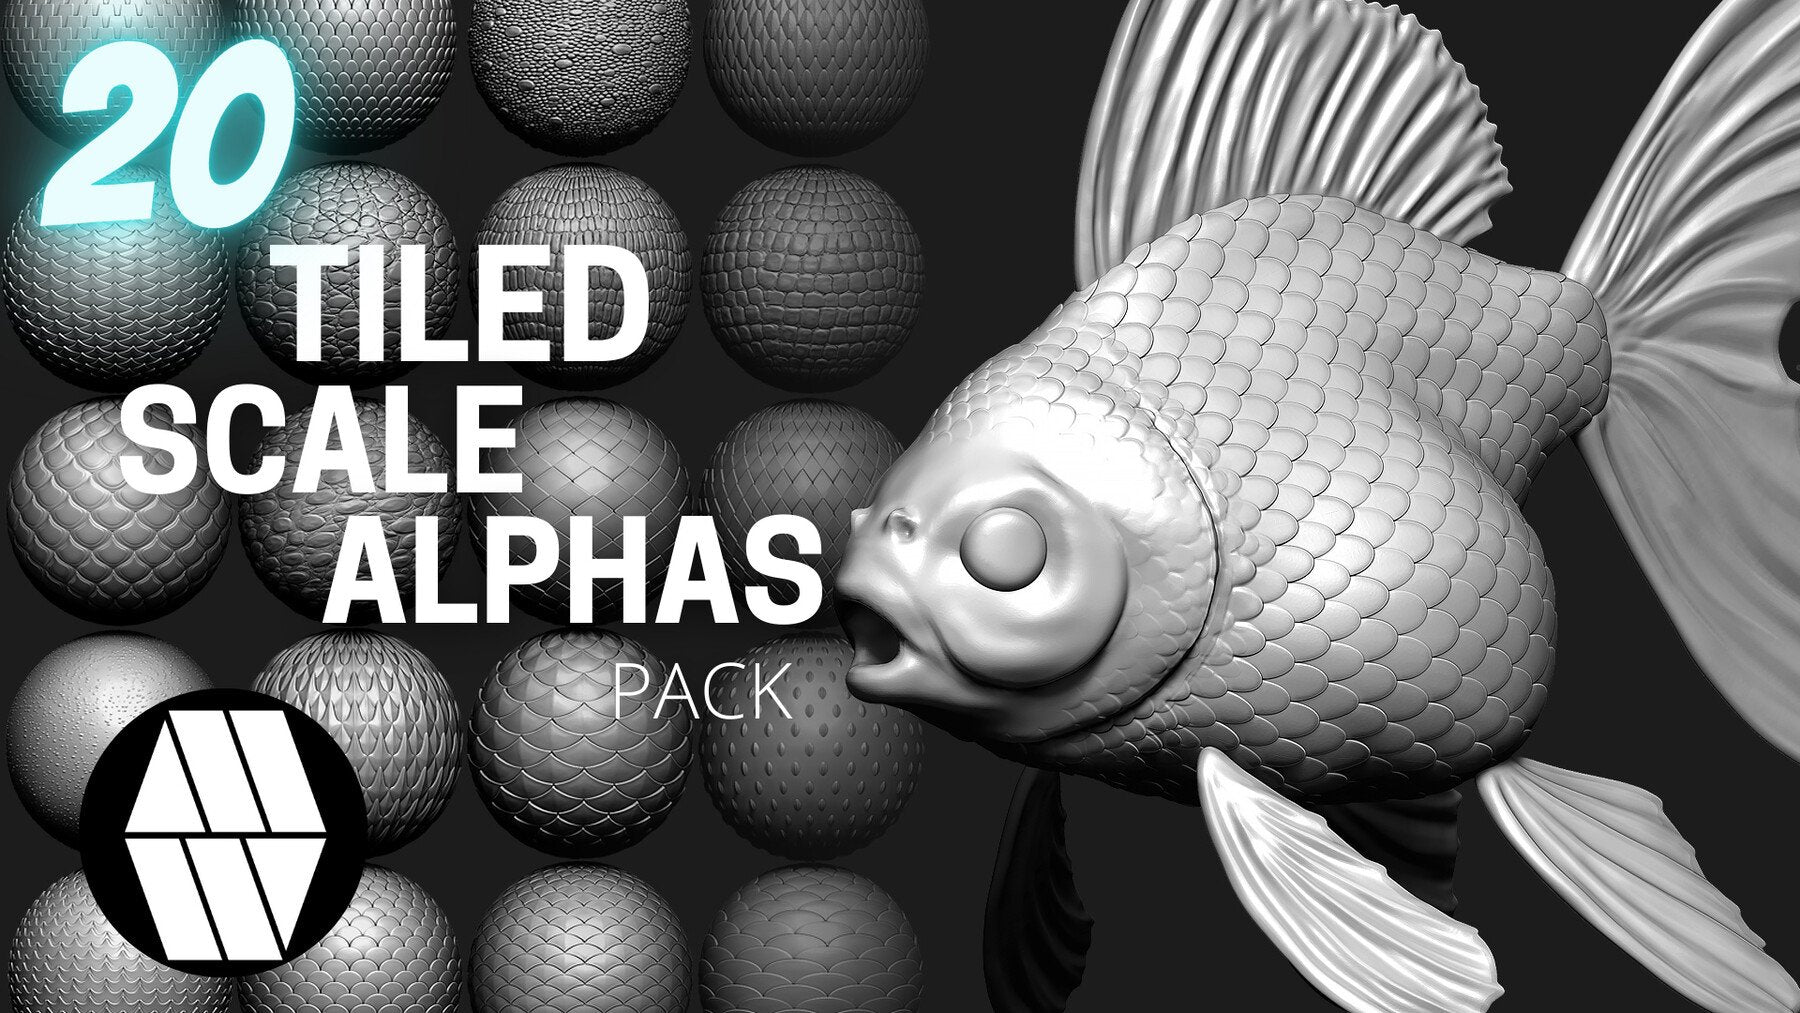 zbrush alphas scales